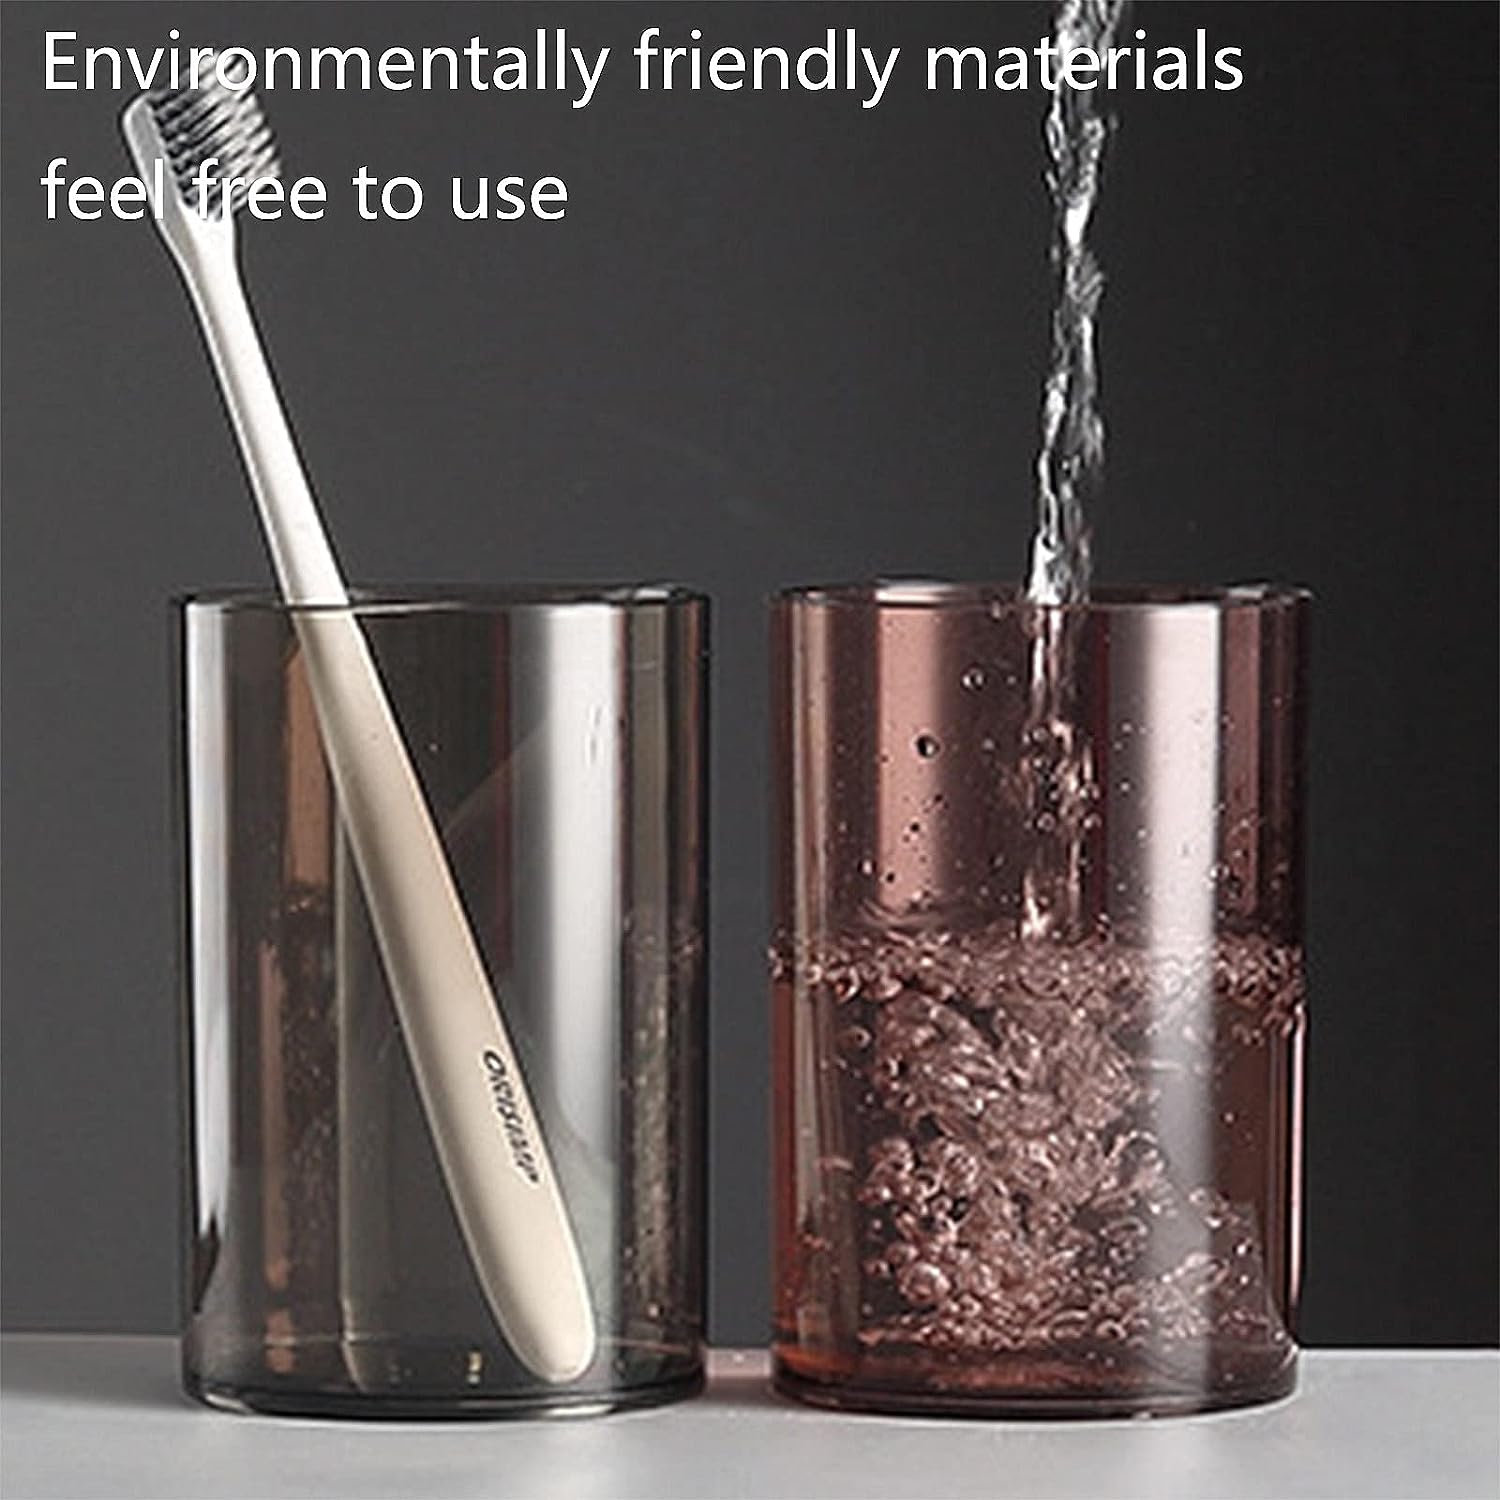 Featuring a Wall Mount Magnetic Adsorption Toothpaste Squeezer Toothbrush Holder with Cup